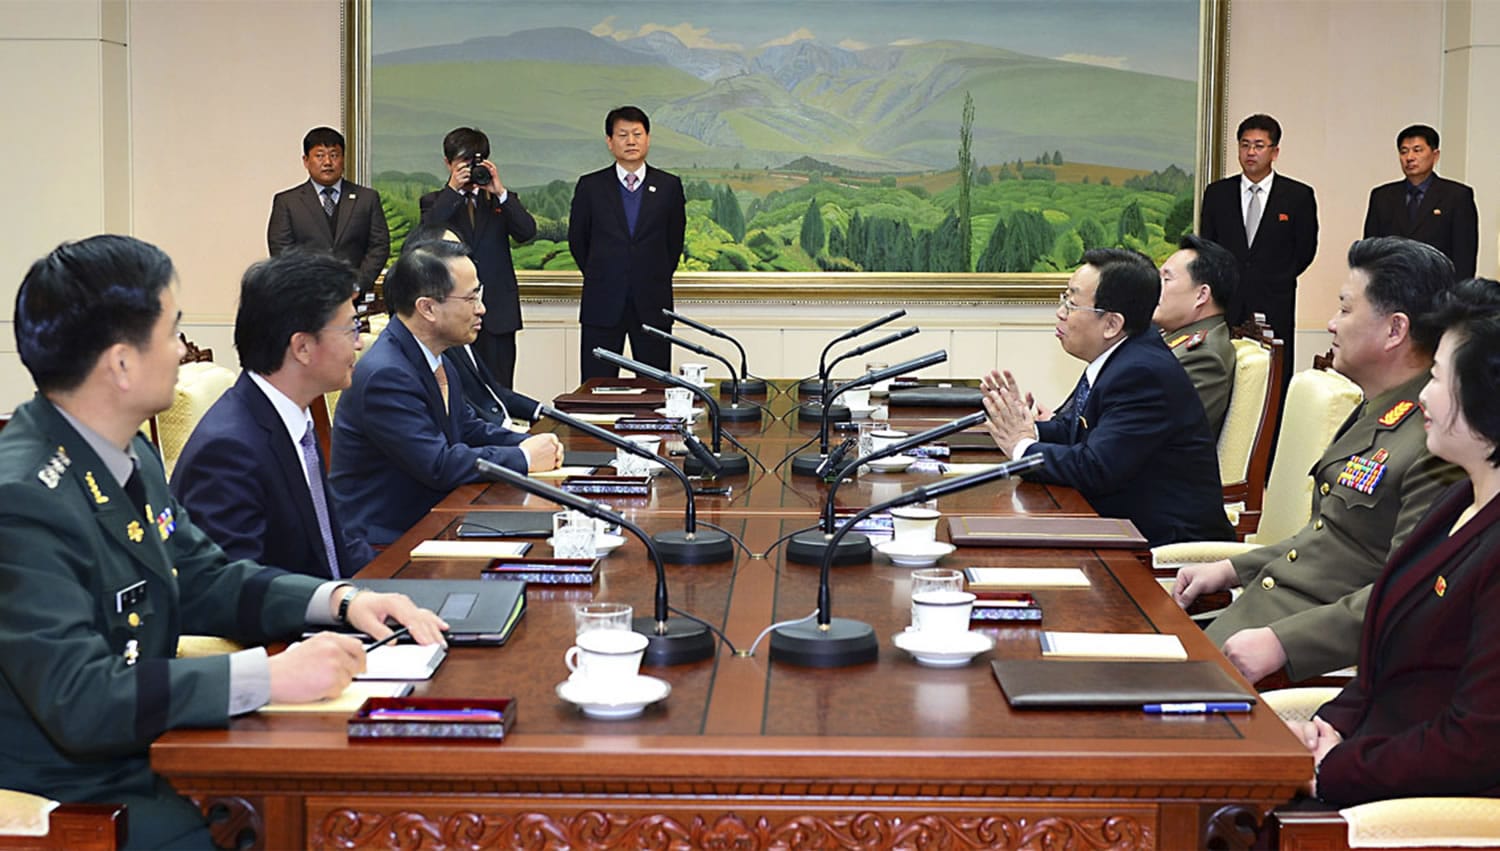 South Korean Unification Ministry
South Korean chief delegate Kim Kyou-hyun, third from left, talks with his North Korean counterpart Won Tong Yon, third from right, during a meeting Friday in the border village of Panumjom, South Korea.